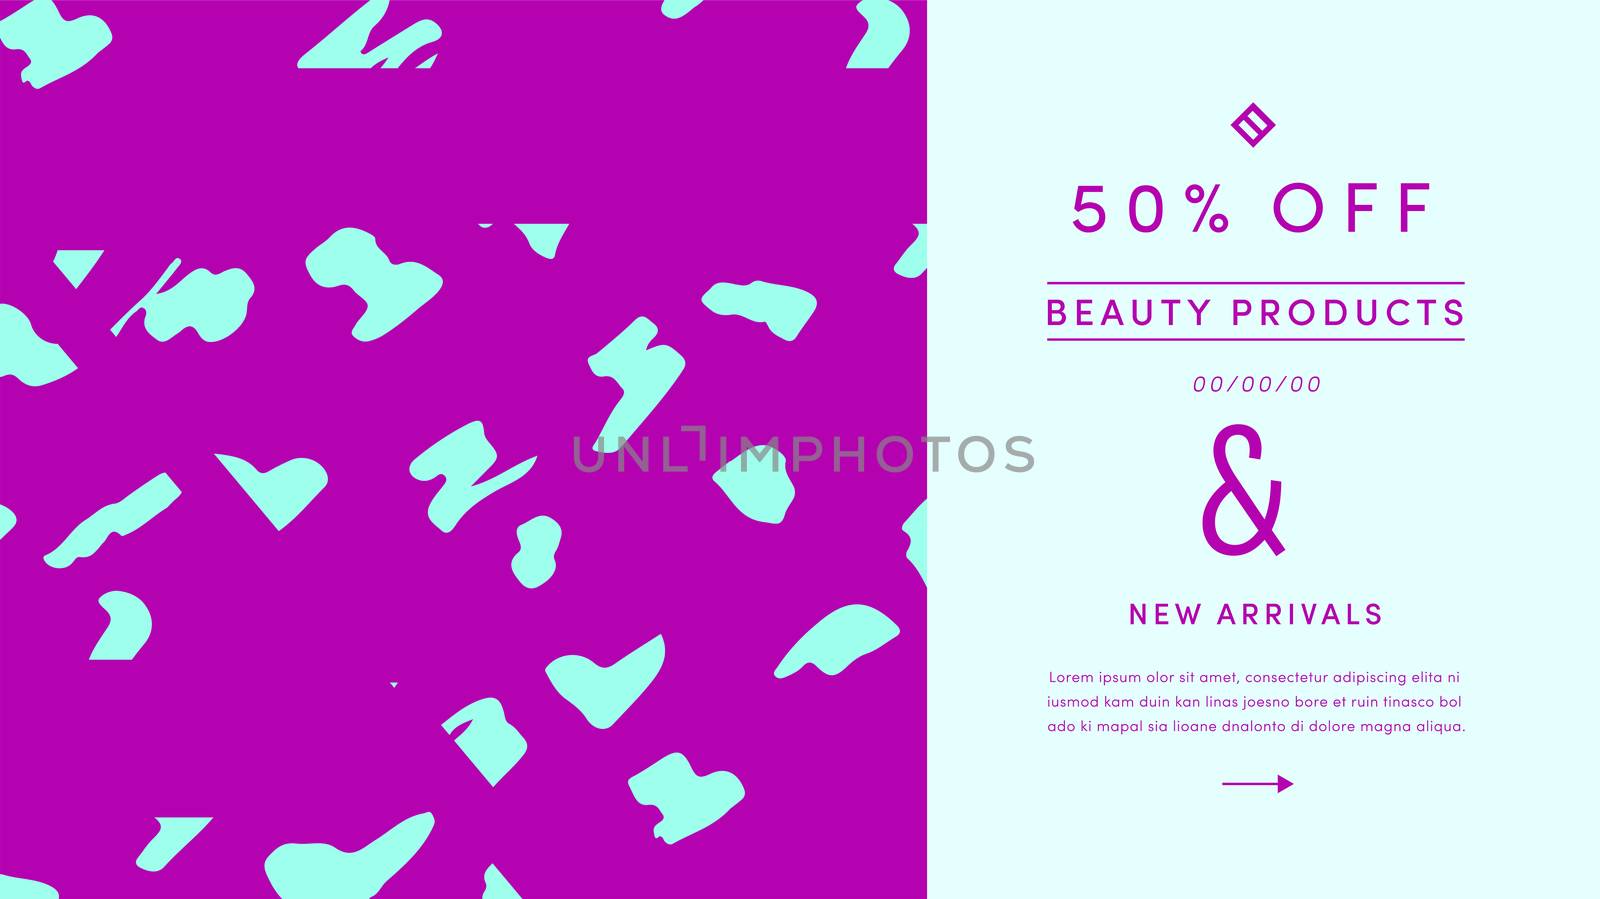 Vector set of greetiing card with beauty products text against white background